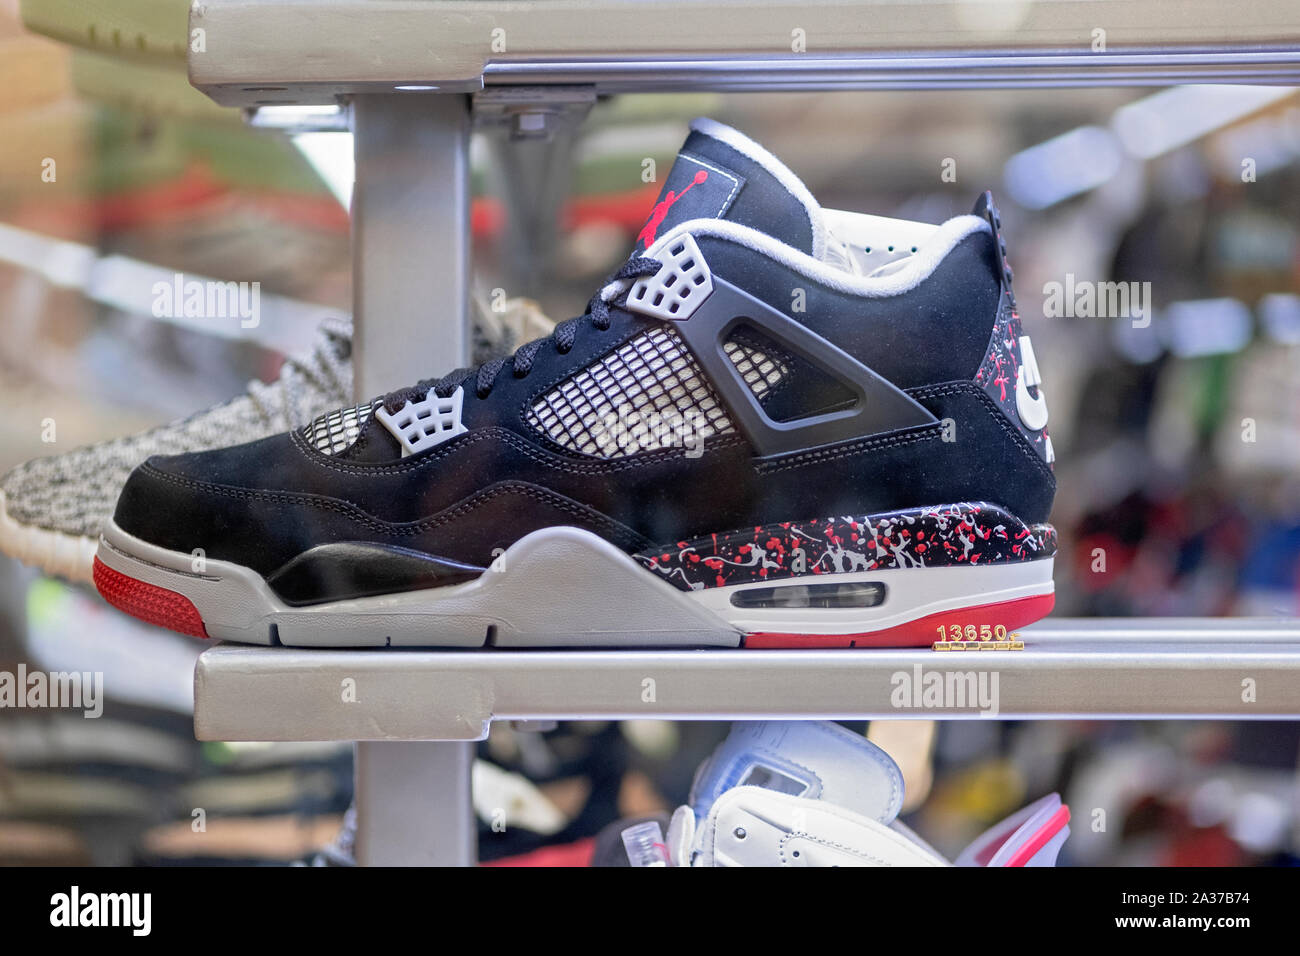 rare expensive AIR JORDAN 4 shoe which debuted in 1989, for sale for $13,850 at Club on Broadway in Greenwich Village Stock Photo Alamy